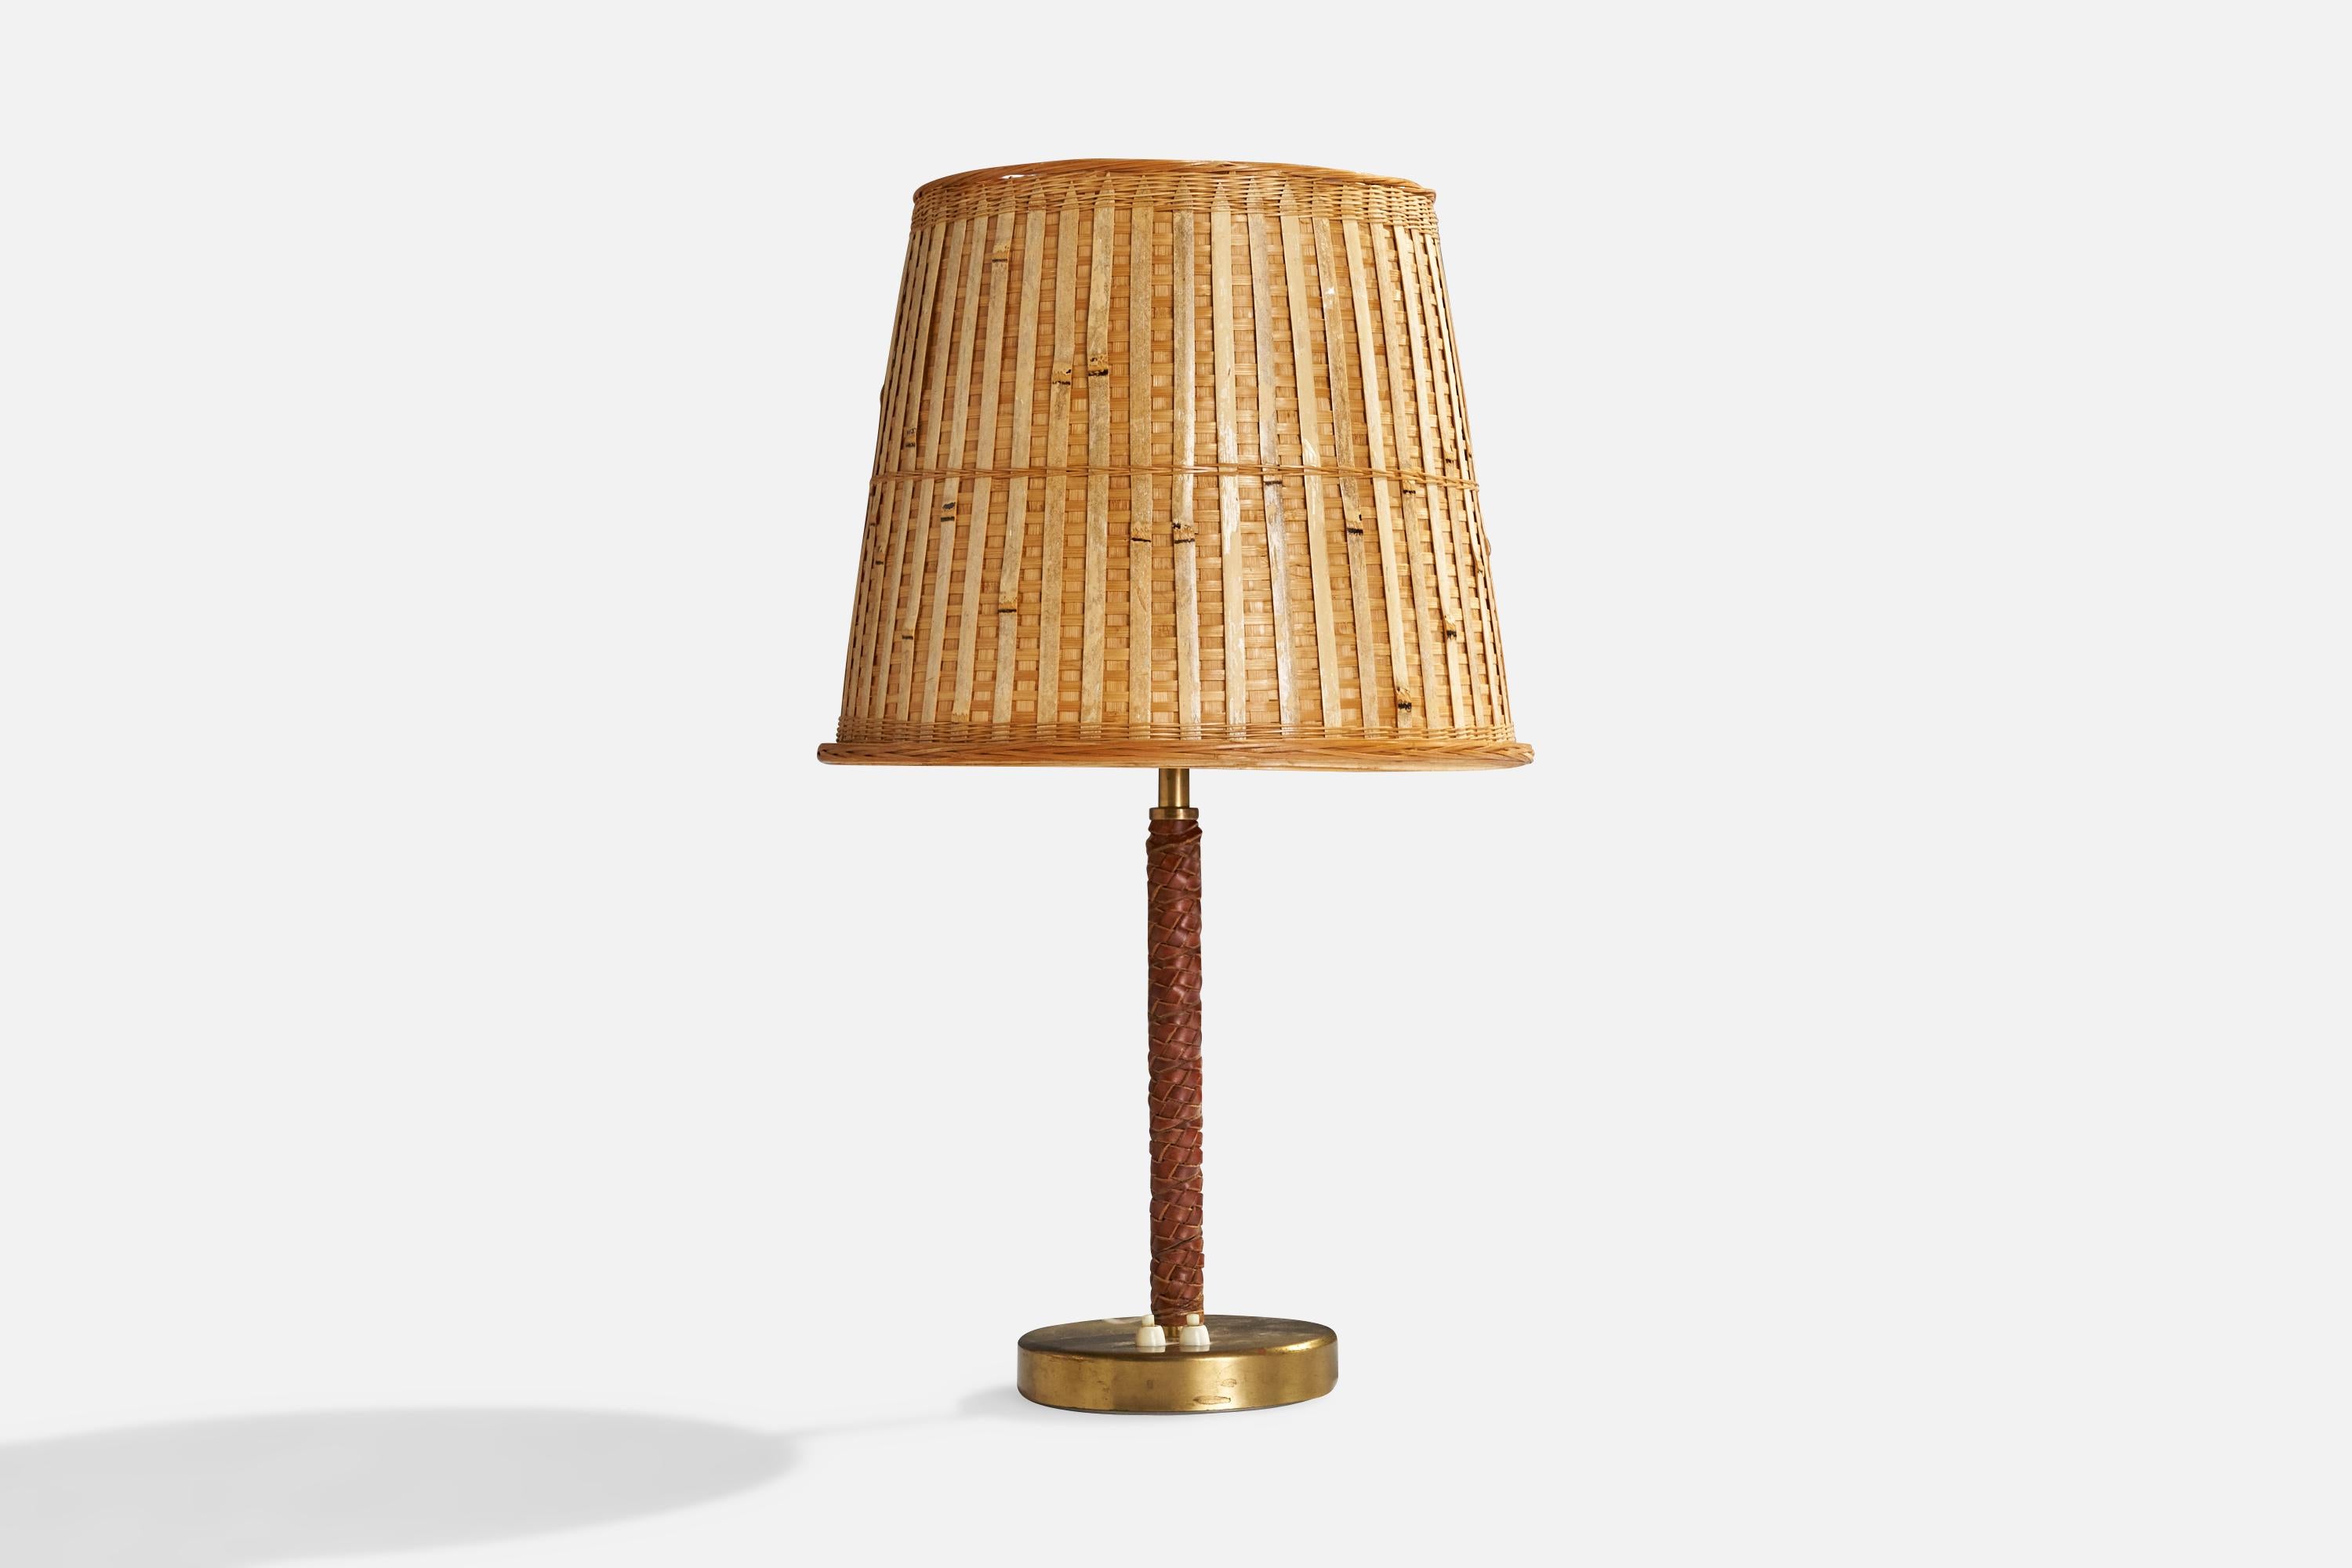 A braided brown leather, brass and rattan table lamp designed by Bertil Brisborg and produced by Nordiska Kompaniet, Sweden, 1940s.

Assorted vintage rattan lampshade.

Overall Dimensions (inches): 24